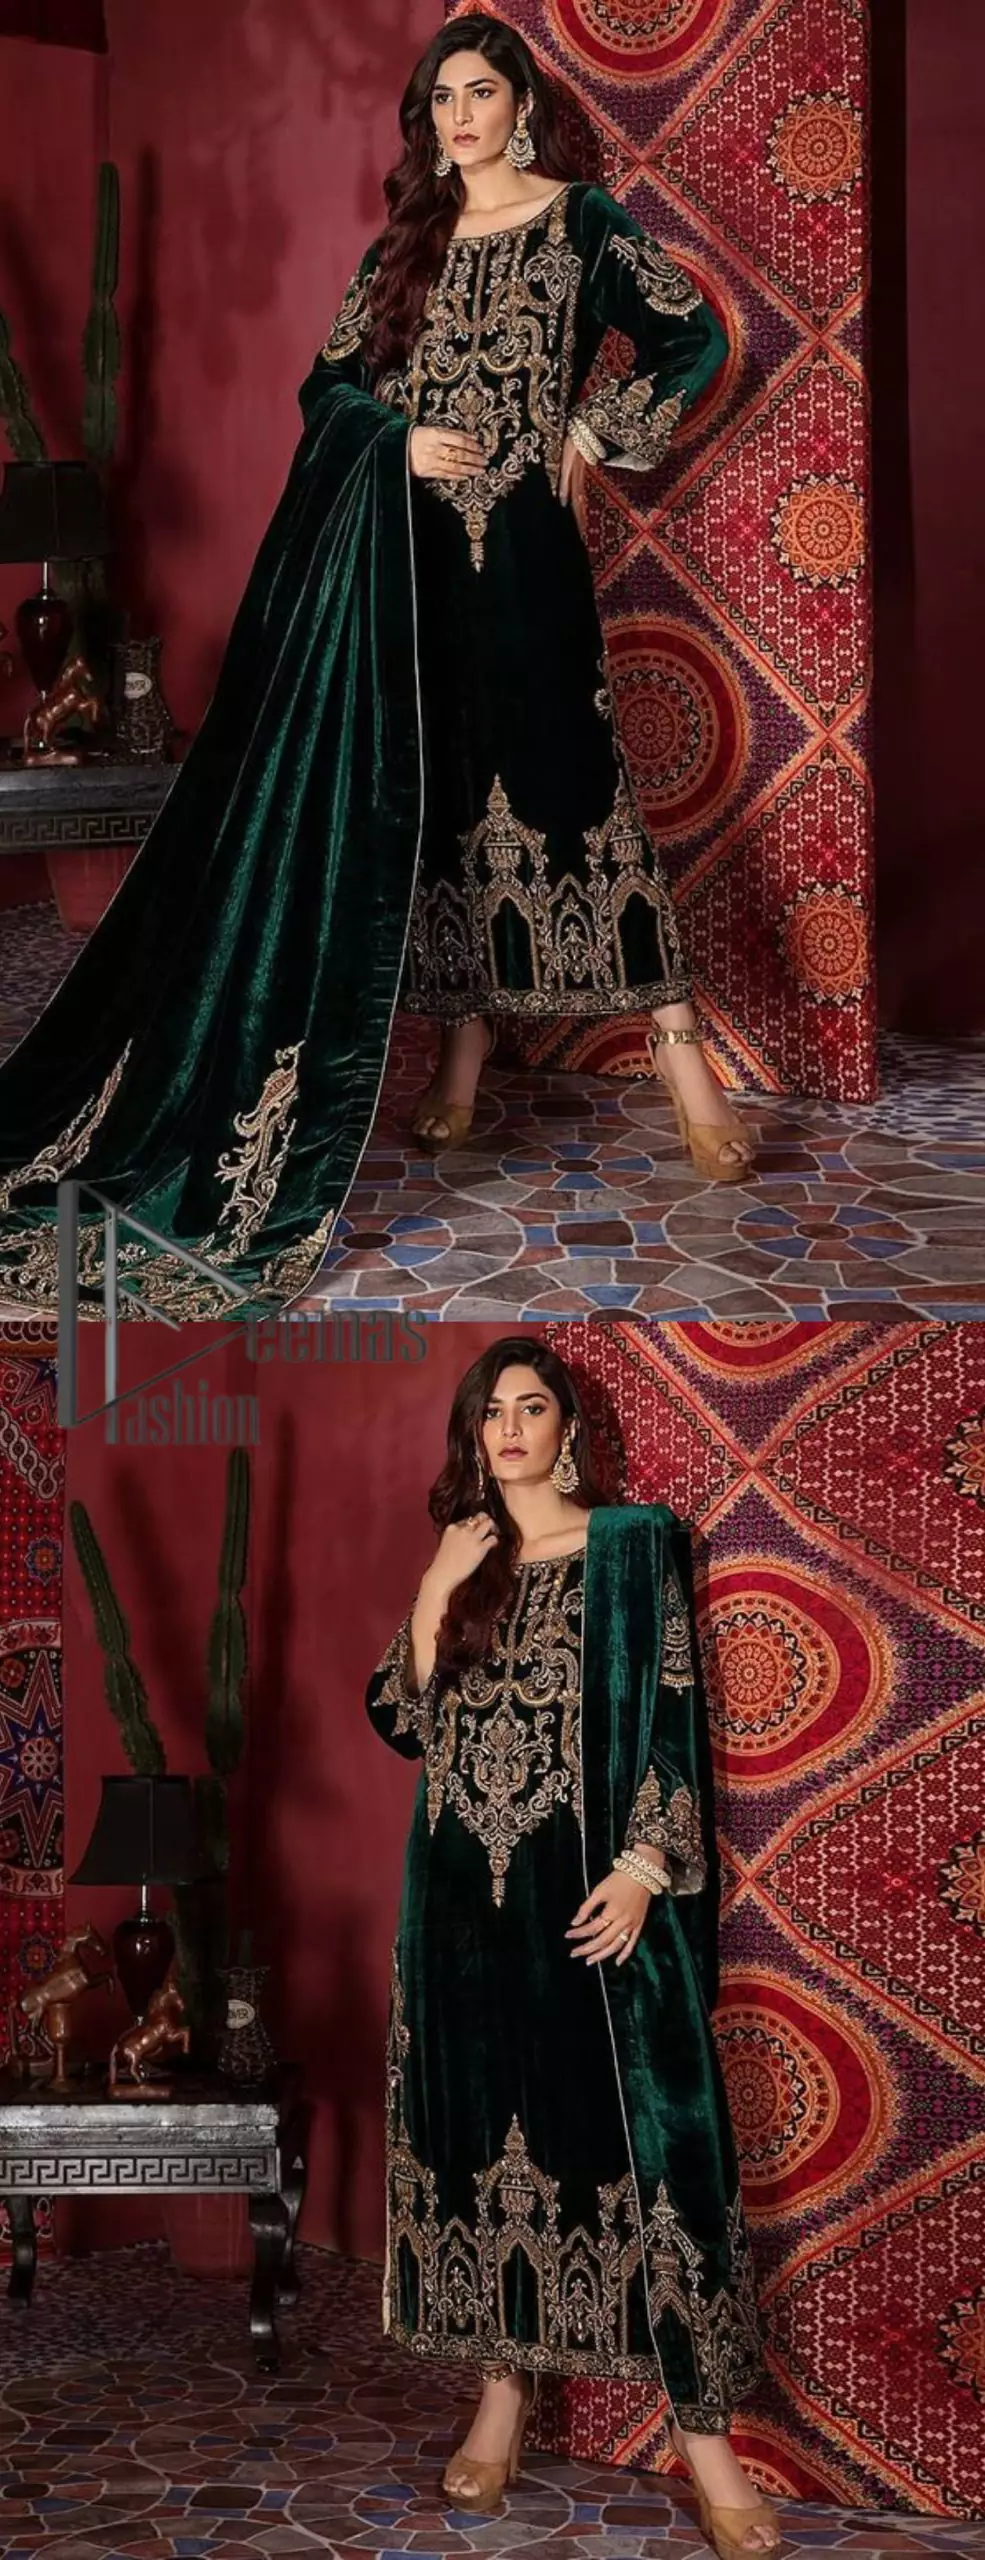 Create your own fantastic day with this bottle green velvet article that style serves for an elevated look. The shirt is flawless in bottle green colour with delicate antique golden work that includes kora, dabka & mukesh details that are artistically embellished to give a beautiful flow to the outfit.  Dupatta is like a shawl in velvet that blends both classical and contemporary trends that will make you swoon in it.